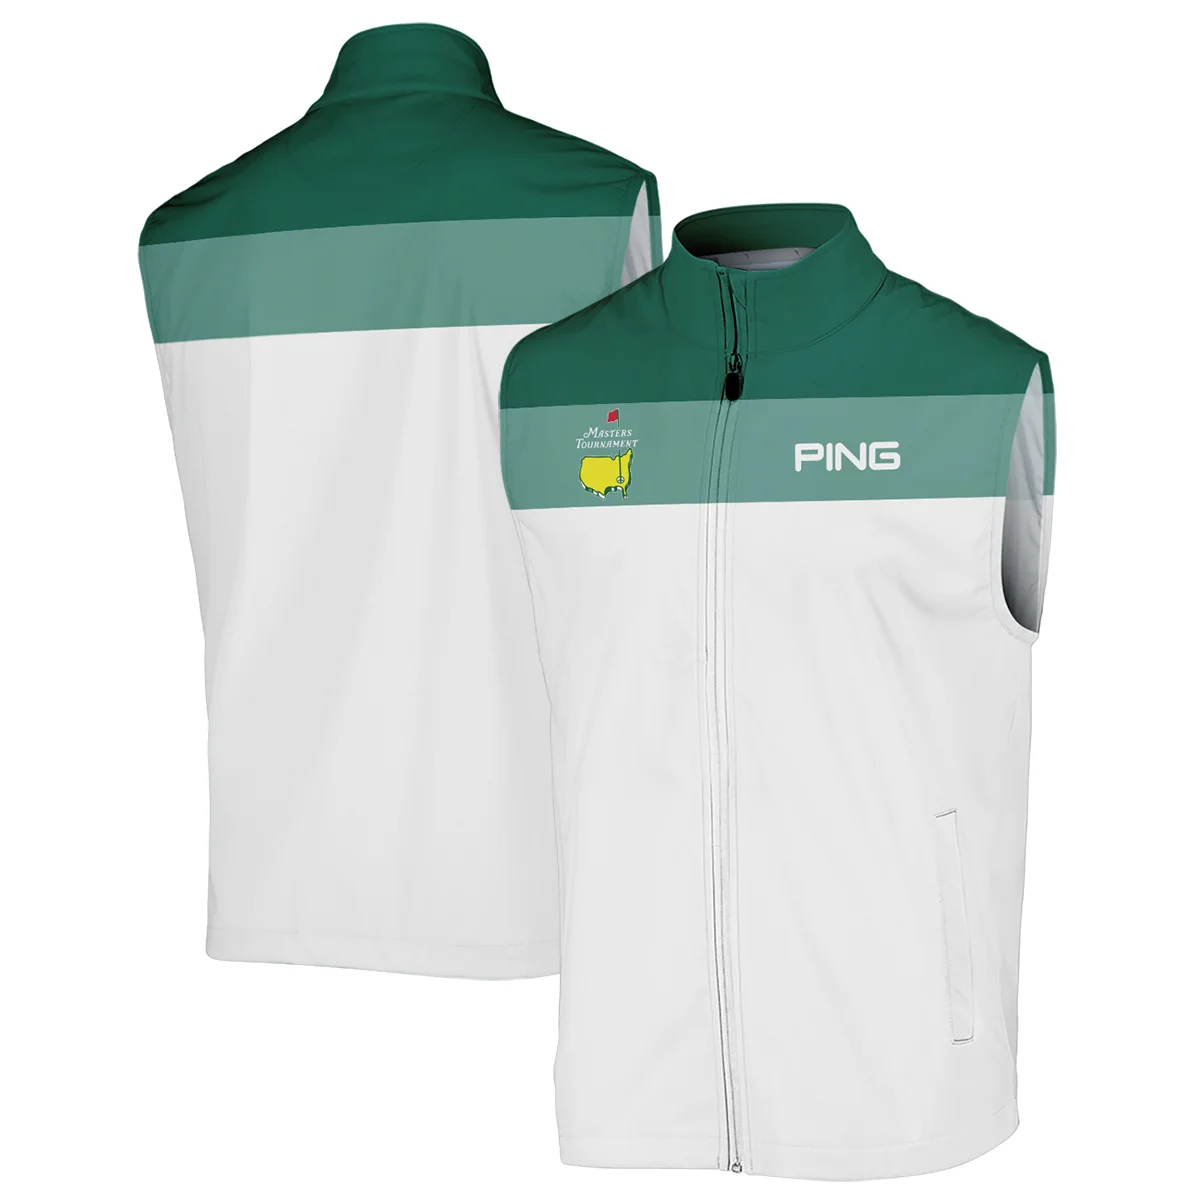 Golf Masters Tournament Ping Zipper Polo Shirt Sports Green And White All Over Print Zipper Polo Shirt For Men